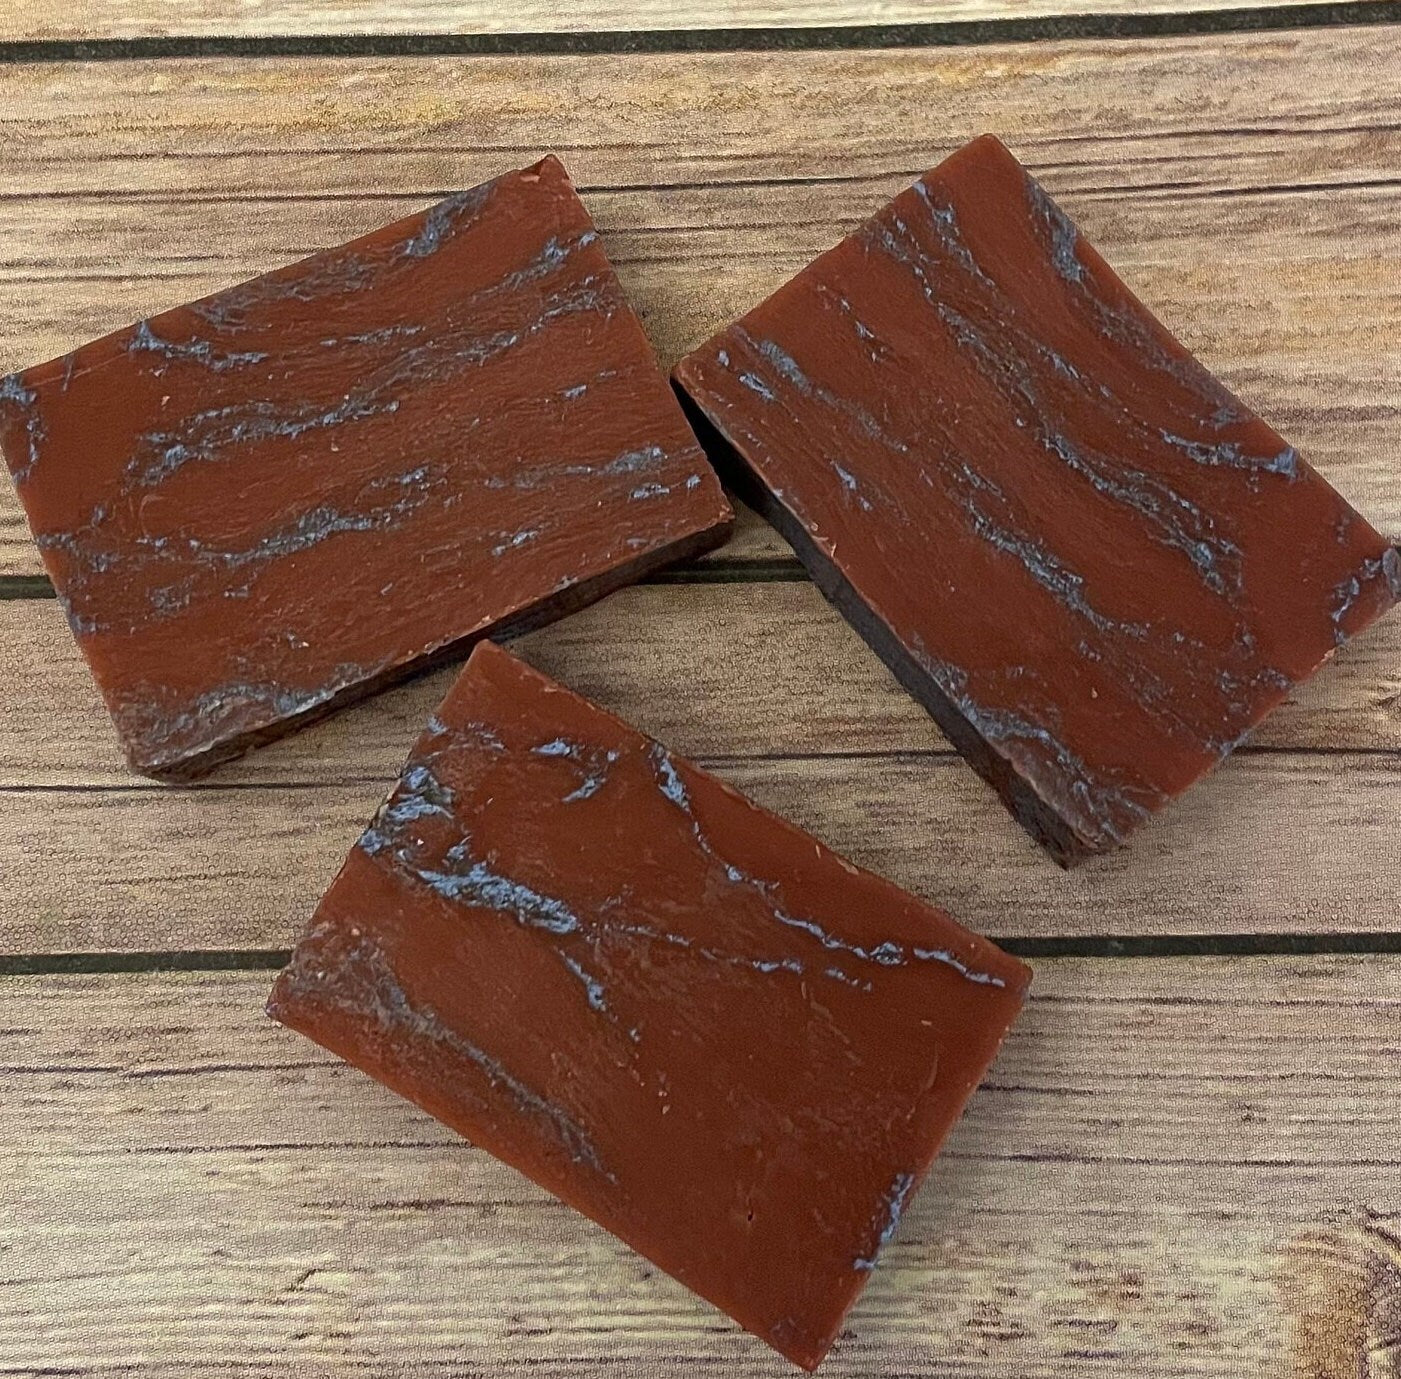 Ivy Creek Very Berry Soap - Handcrafted Cold Process Soap Bar with Coconut Oil, Olive Oil, Shea Butter, and All-Natural Ingredients, 4 oz